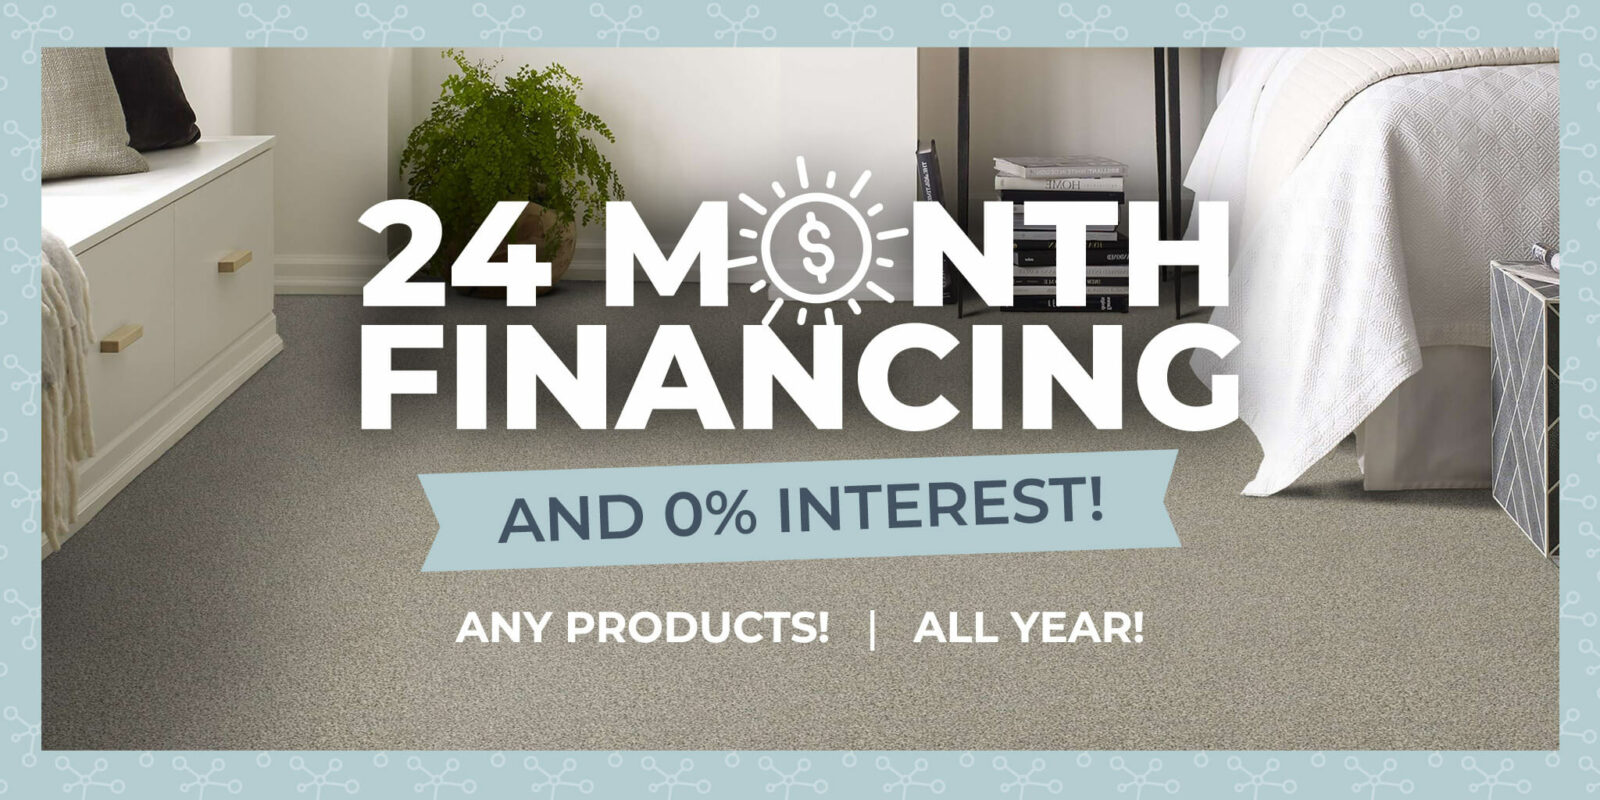 24 Month Financing & 0% Interest - Any Products! | All Year!